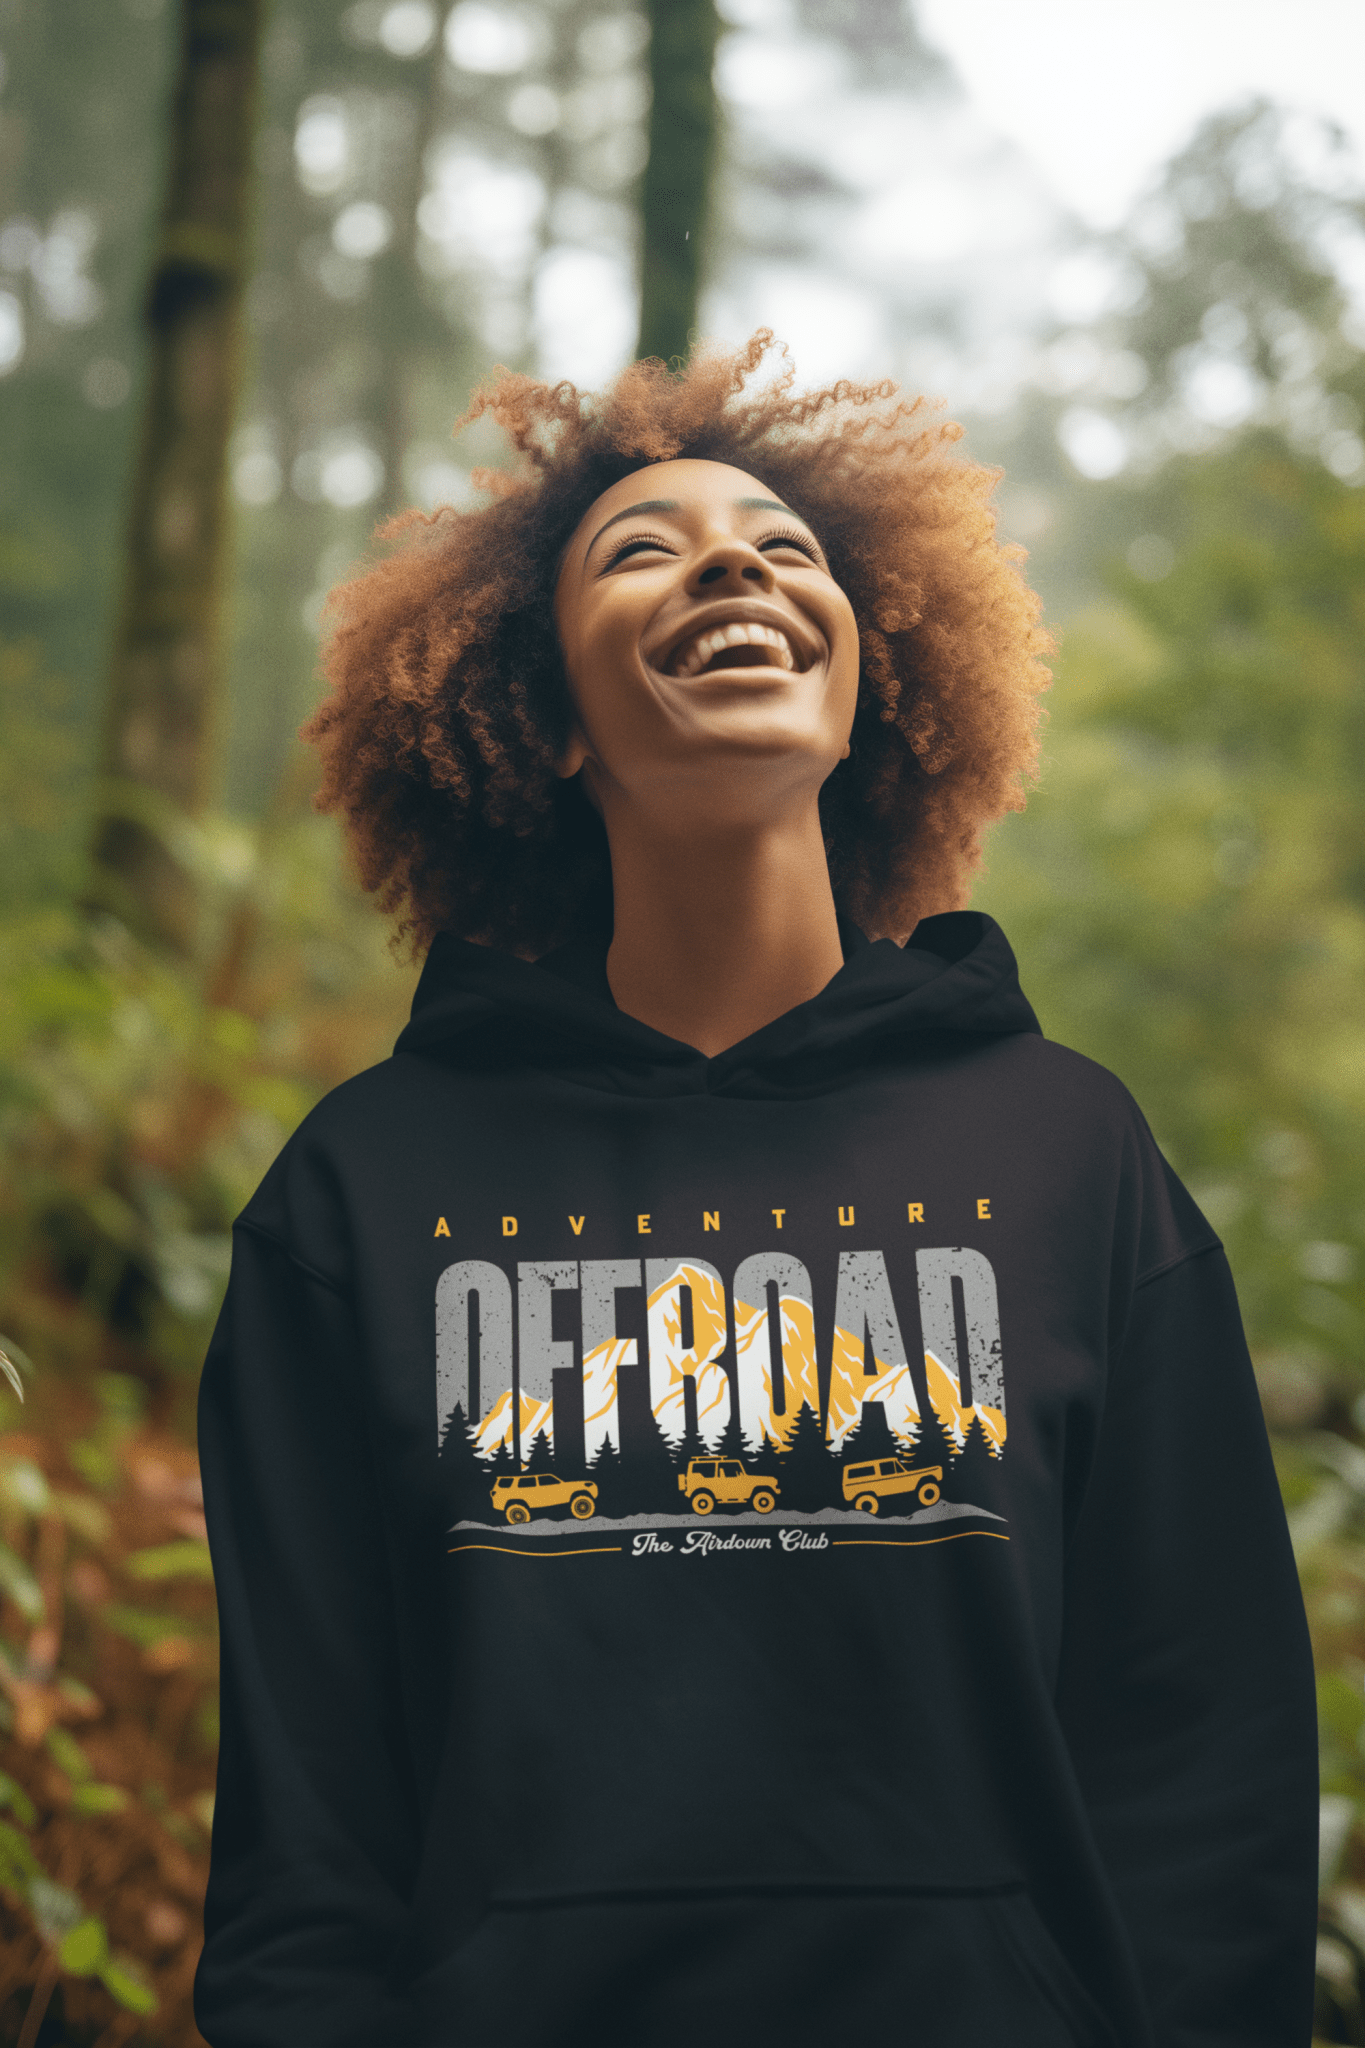 Adventure Offroad-The Airdown Club Hoodie - Goats Trail Off-Road Apparel Company